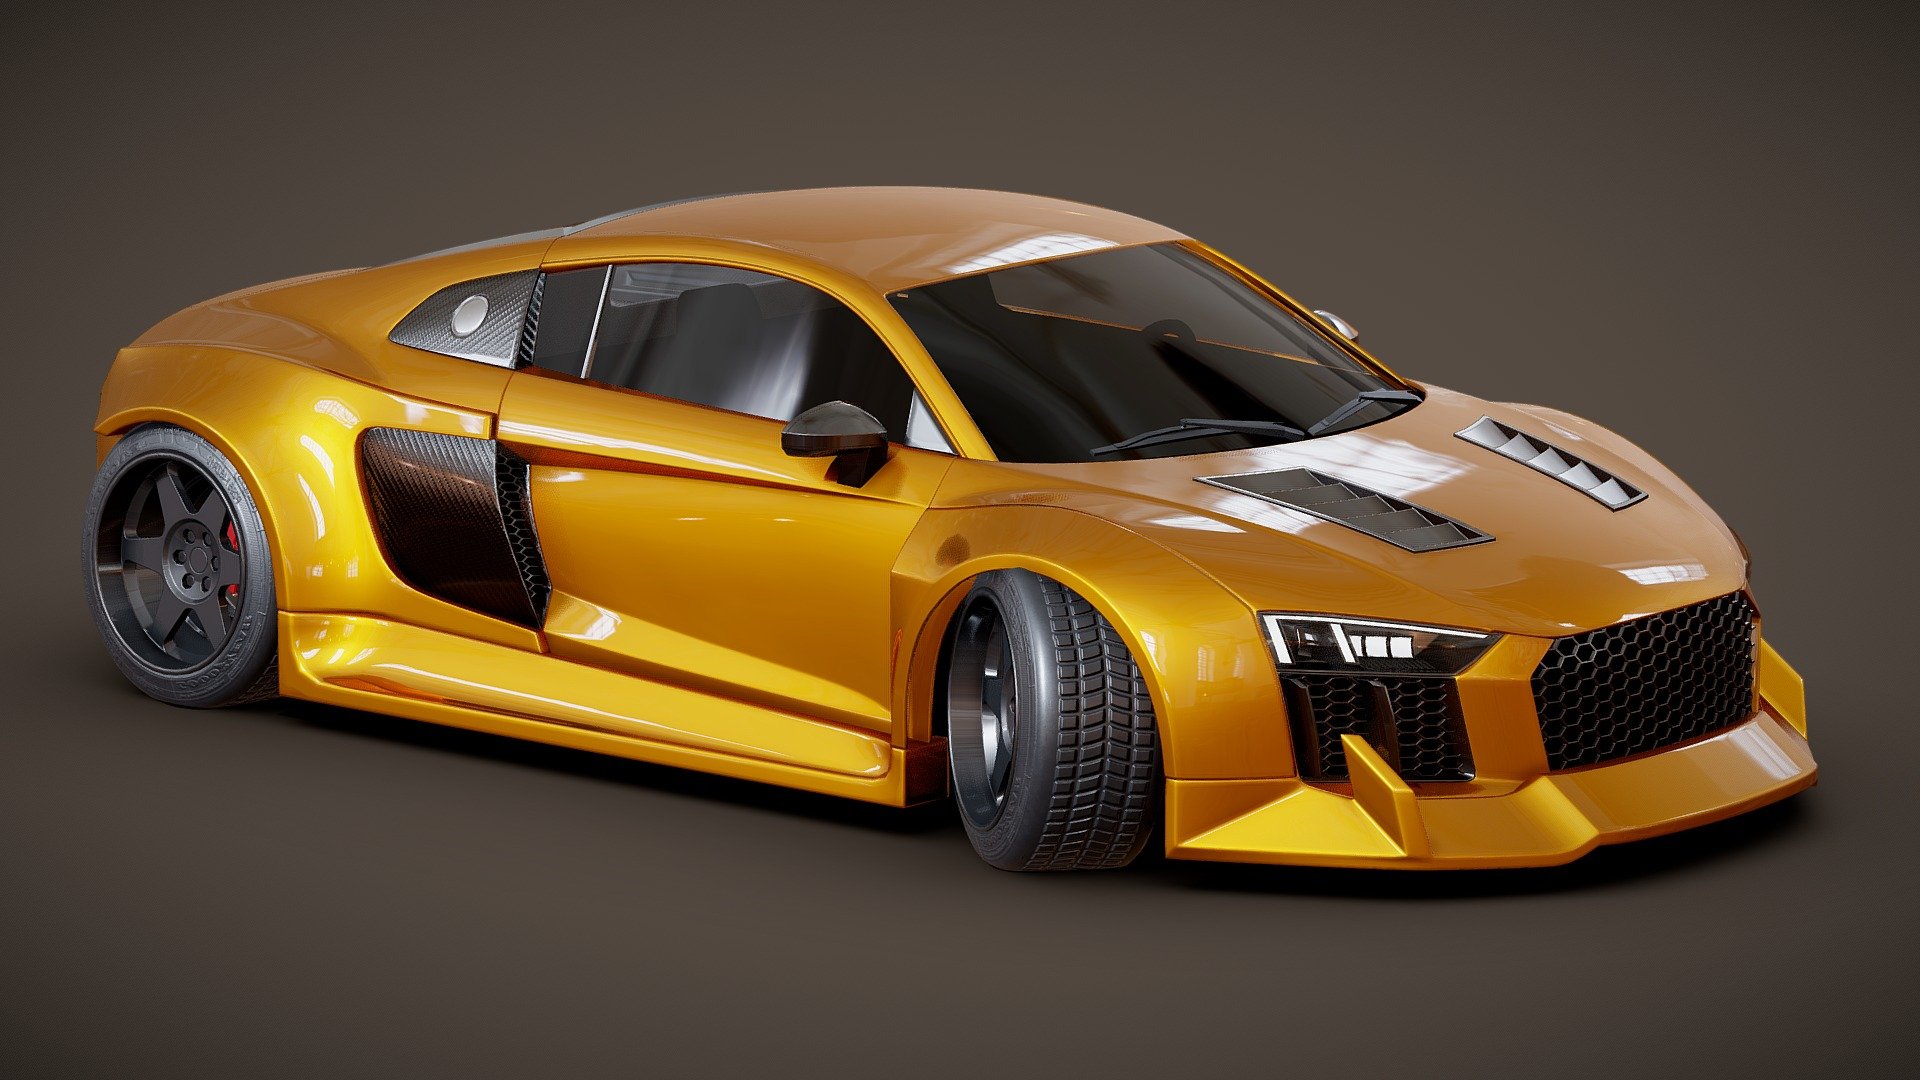 Another high-poly vehicle model, based off of the Audi R8. This project took me a while because of procrastination, but it's finally done. Feel free to use the model however you'd like. Credit is not required, but heavily appreciated. 


Textures
Wheels = 2048x2048, baseColor, normal, roughness, metallic
Carbon Fiber = 2048x2048, baseColor, normal, roughness, metallic
License Plate = 1024x1024, bascolor, normal, roughness

If you'd like to support my work, you can donate here: https://ko-fi.com/wallon - Audi R8 - Download Free 3D model by wallon (@realwallon) 3d model